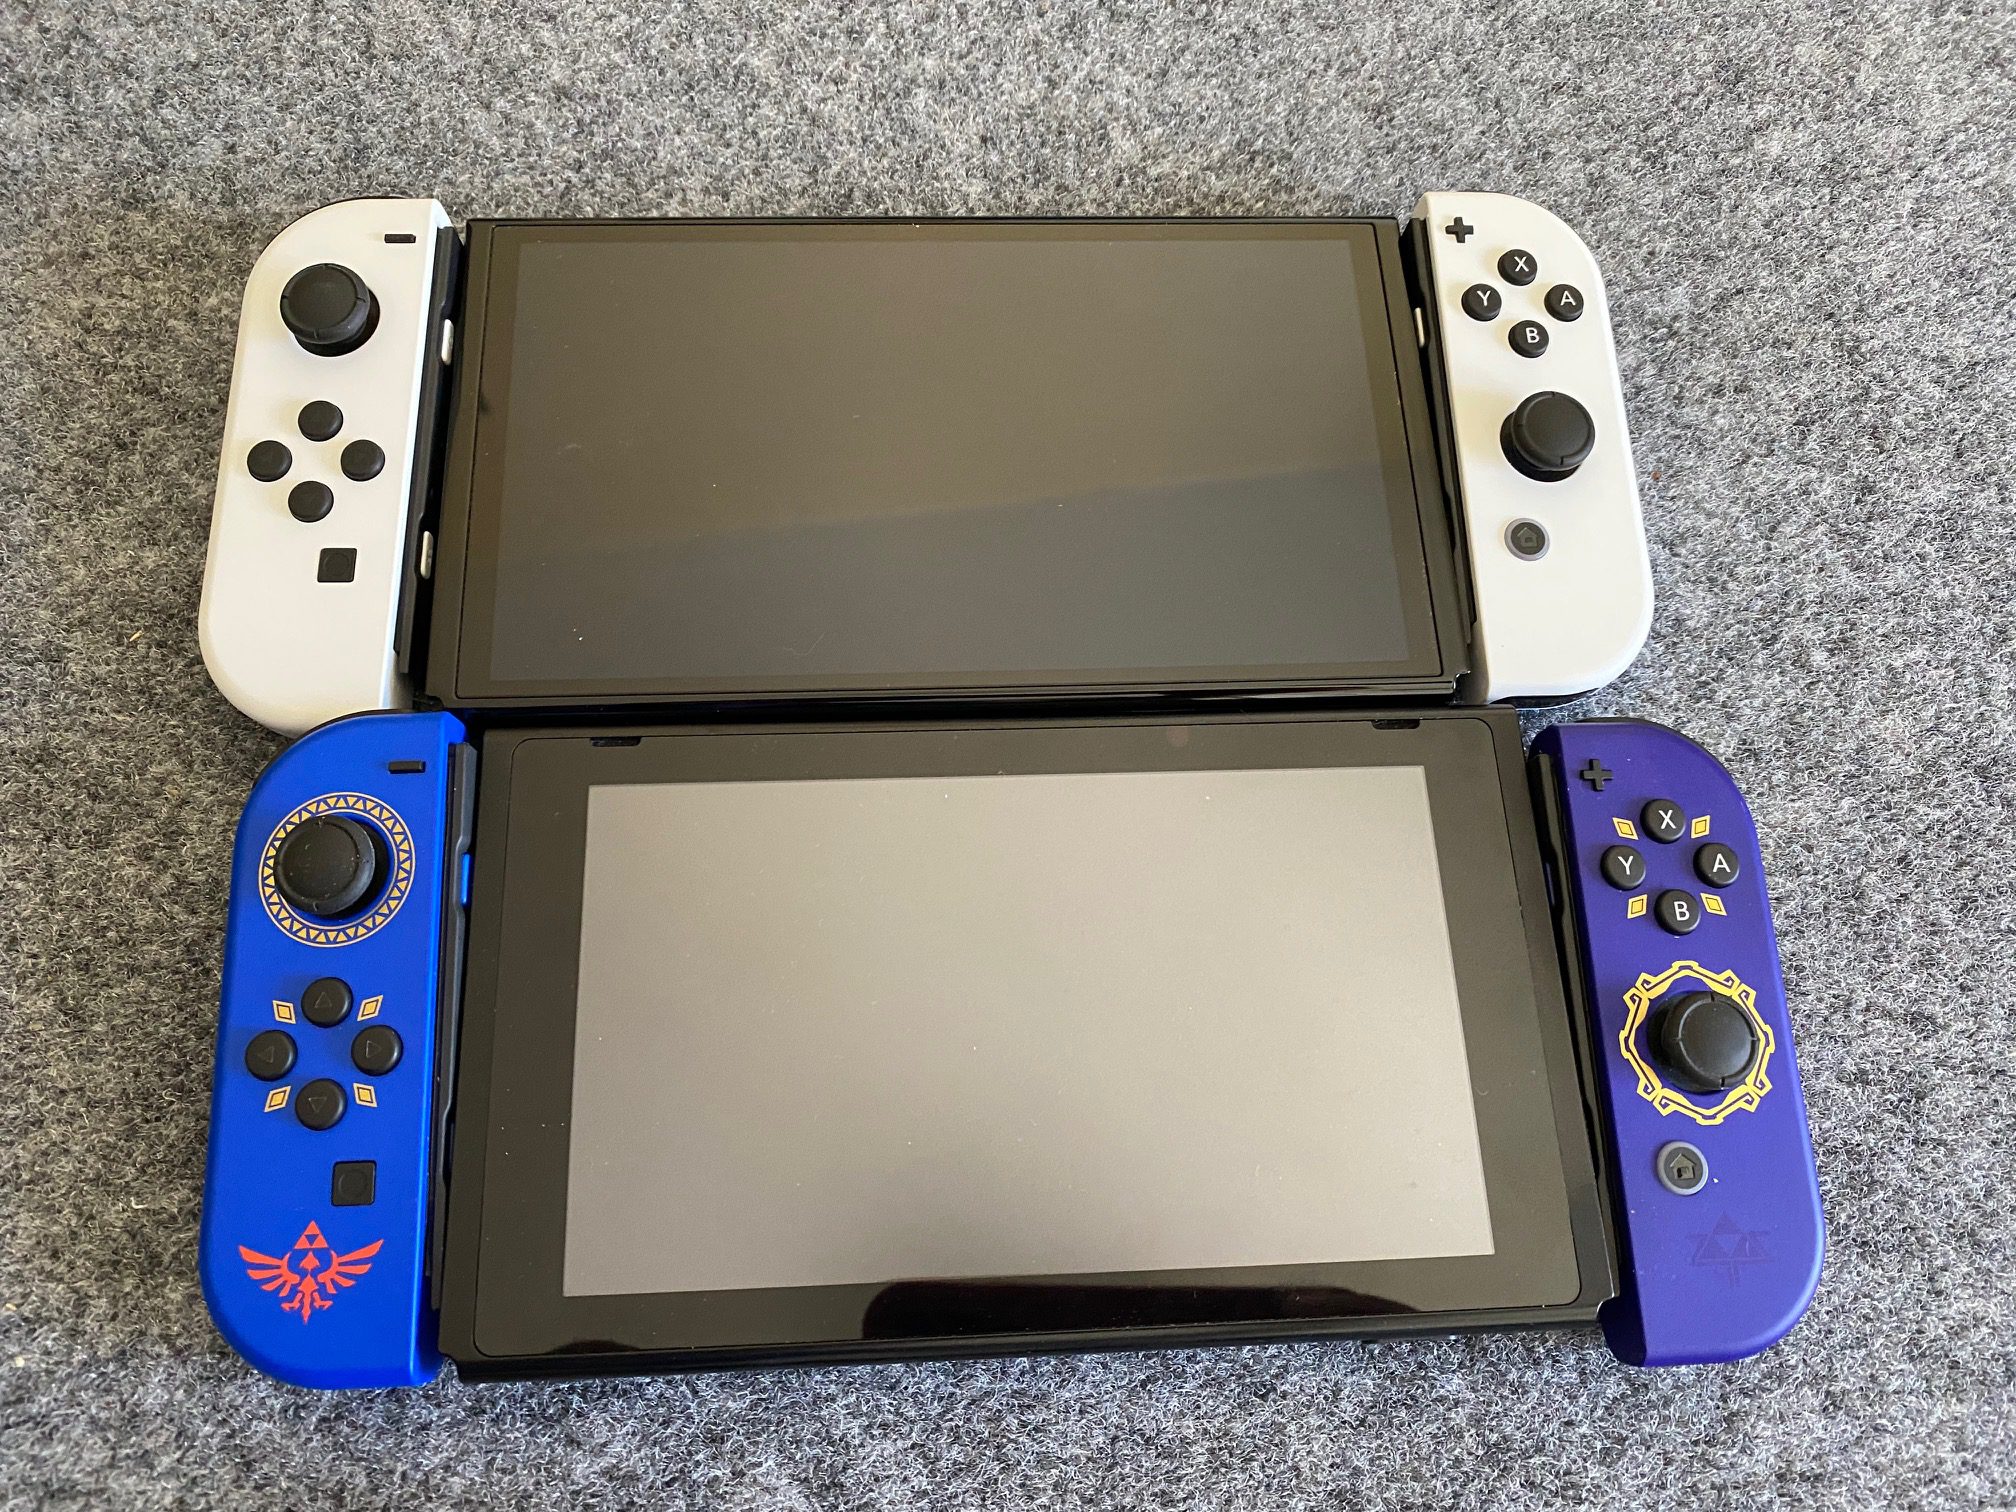 Comparing the OLED screen size with the original Switch screen